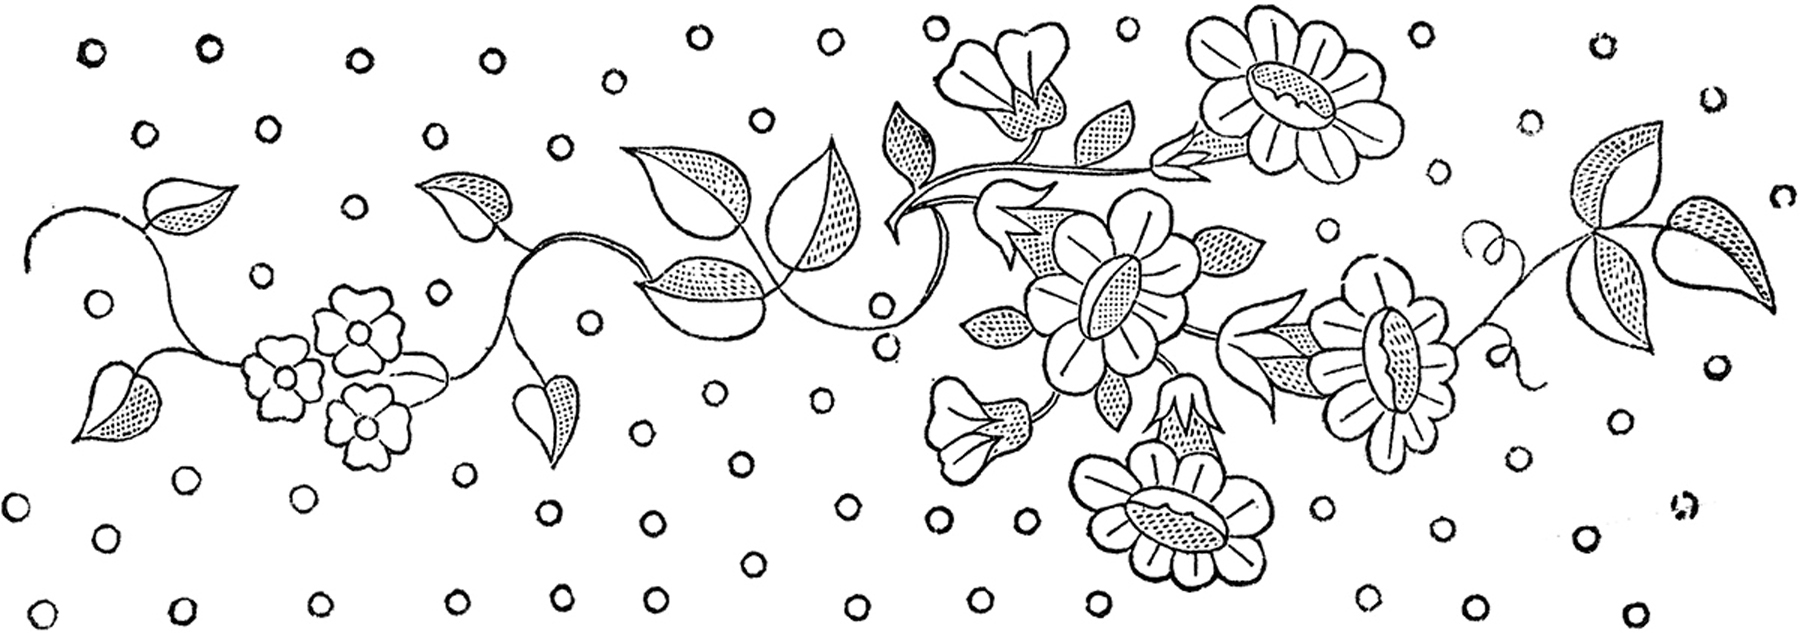 Embroidery Patterns Flowers Floral Embroidery Patterns Pretty The Graphics Fairy